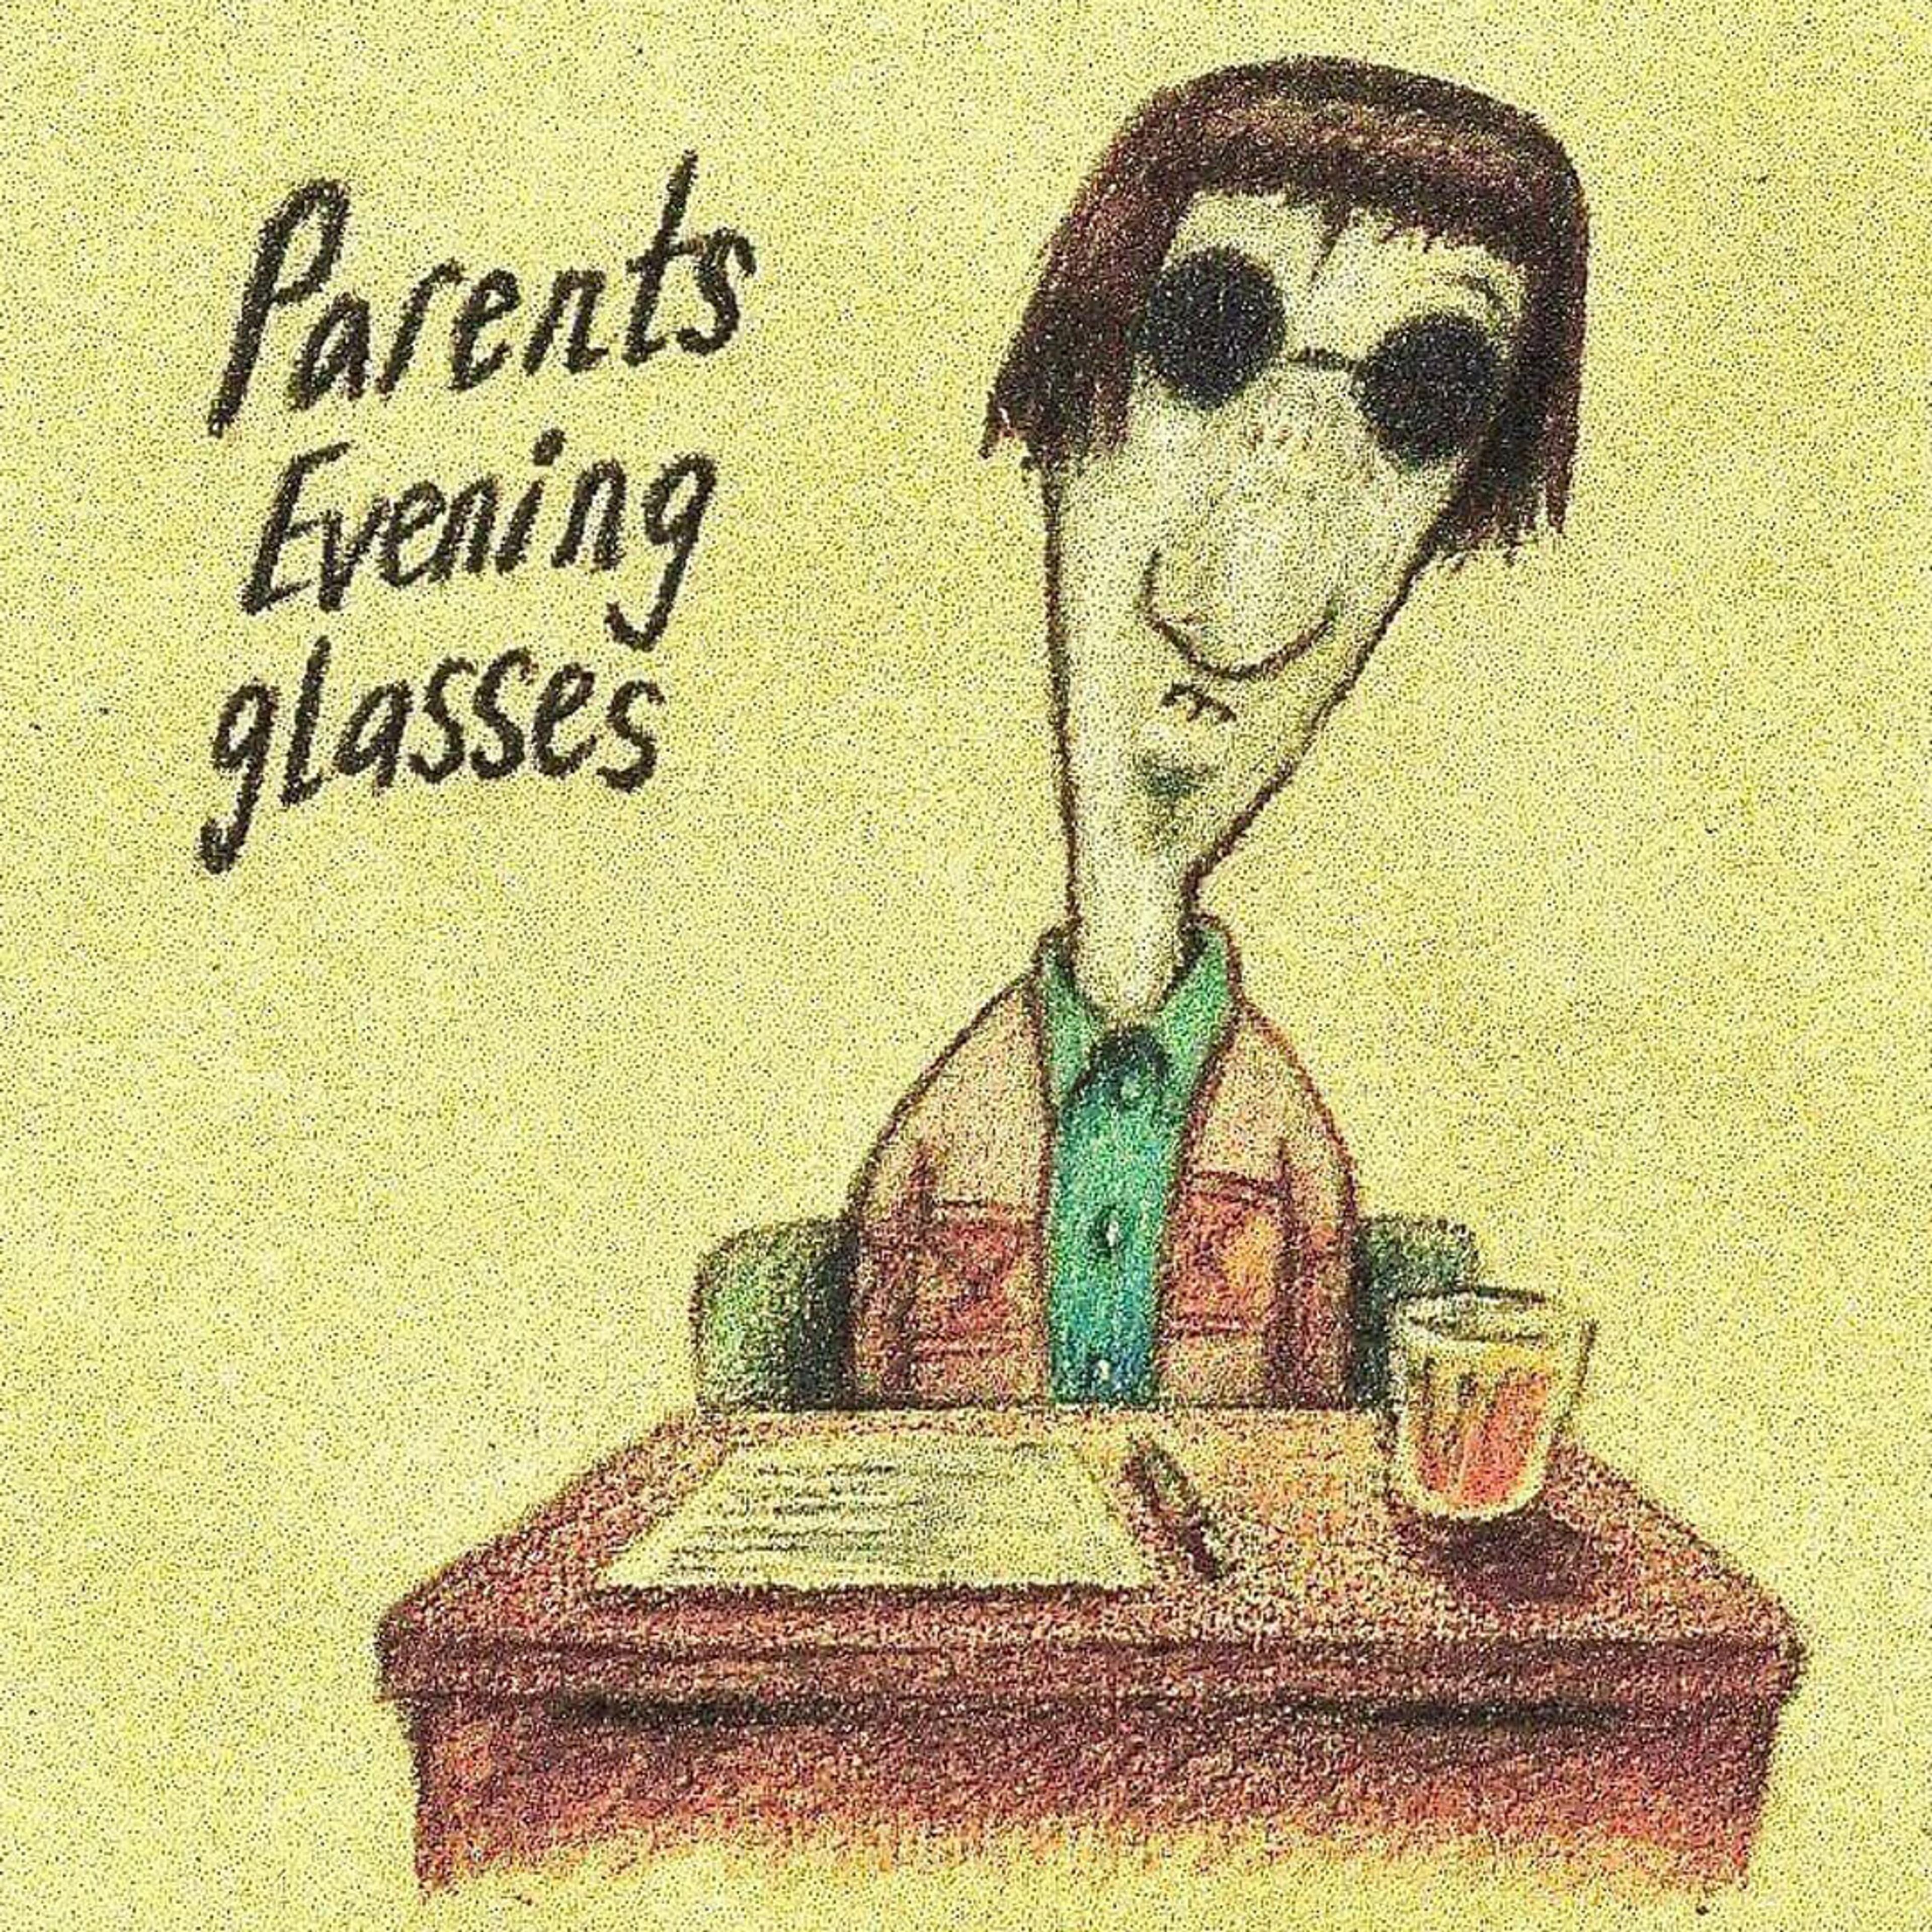 Illustration of a figure seated at a table next to the text 'Parents evening glasses'.